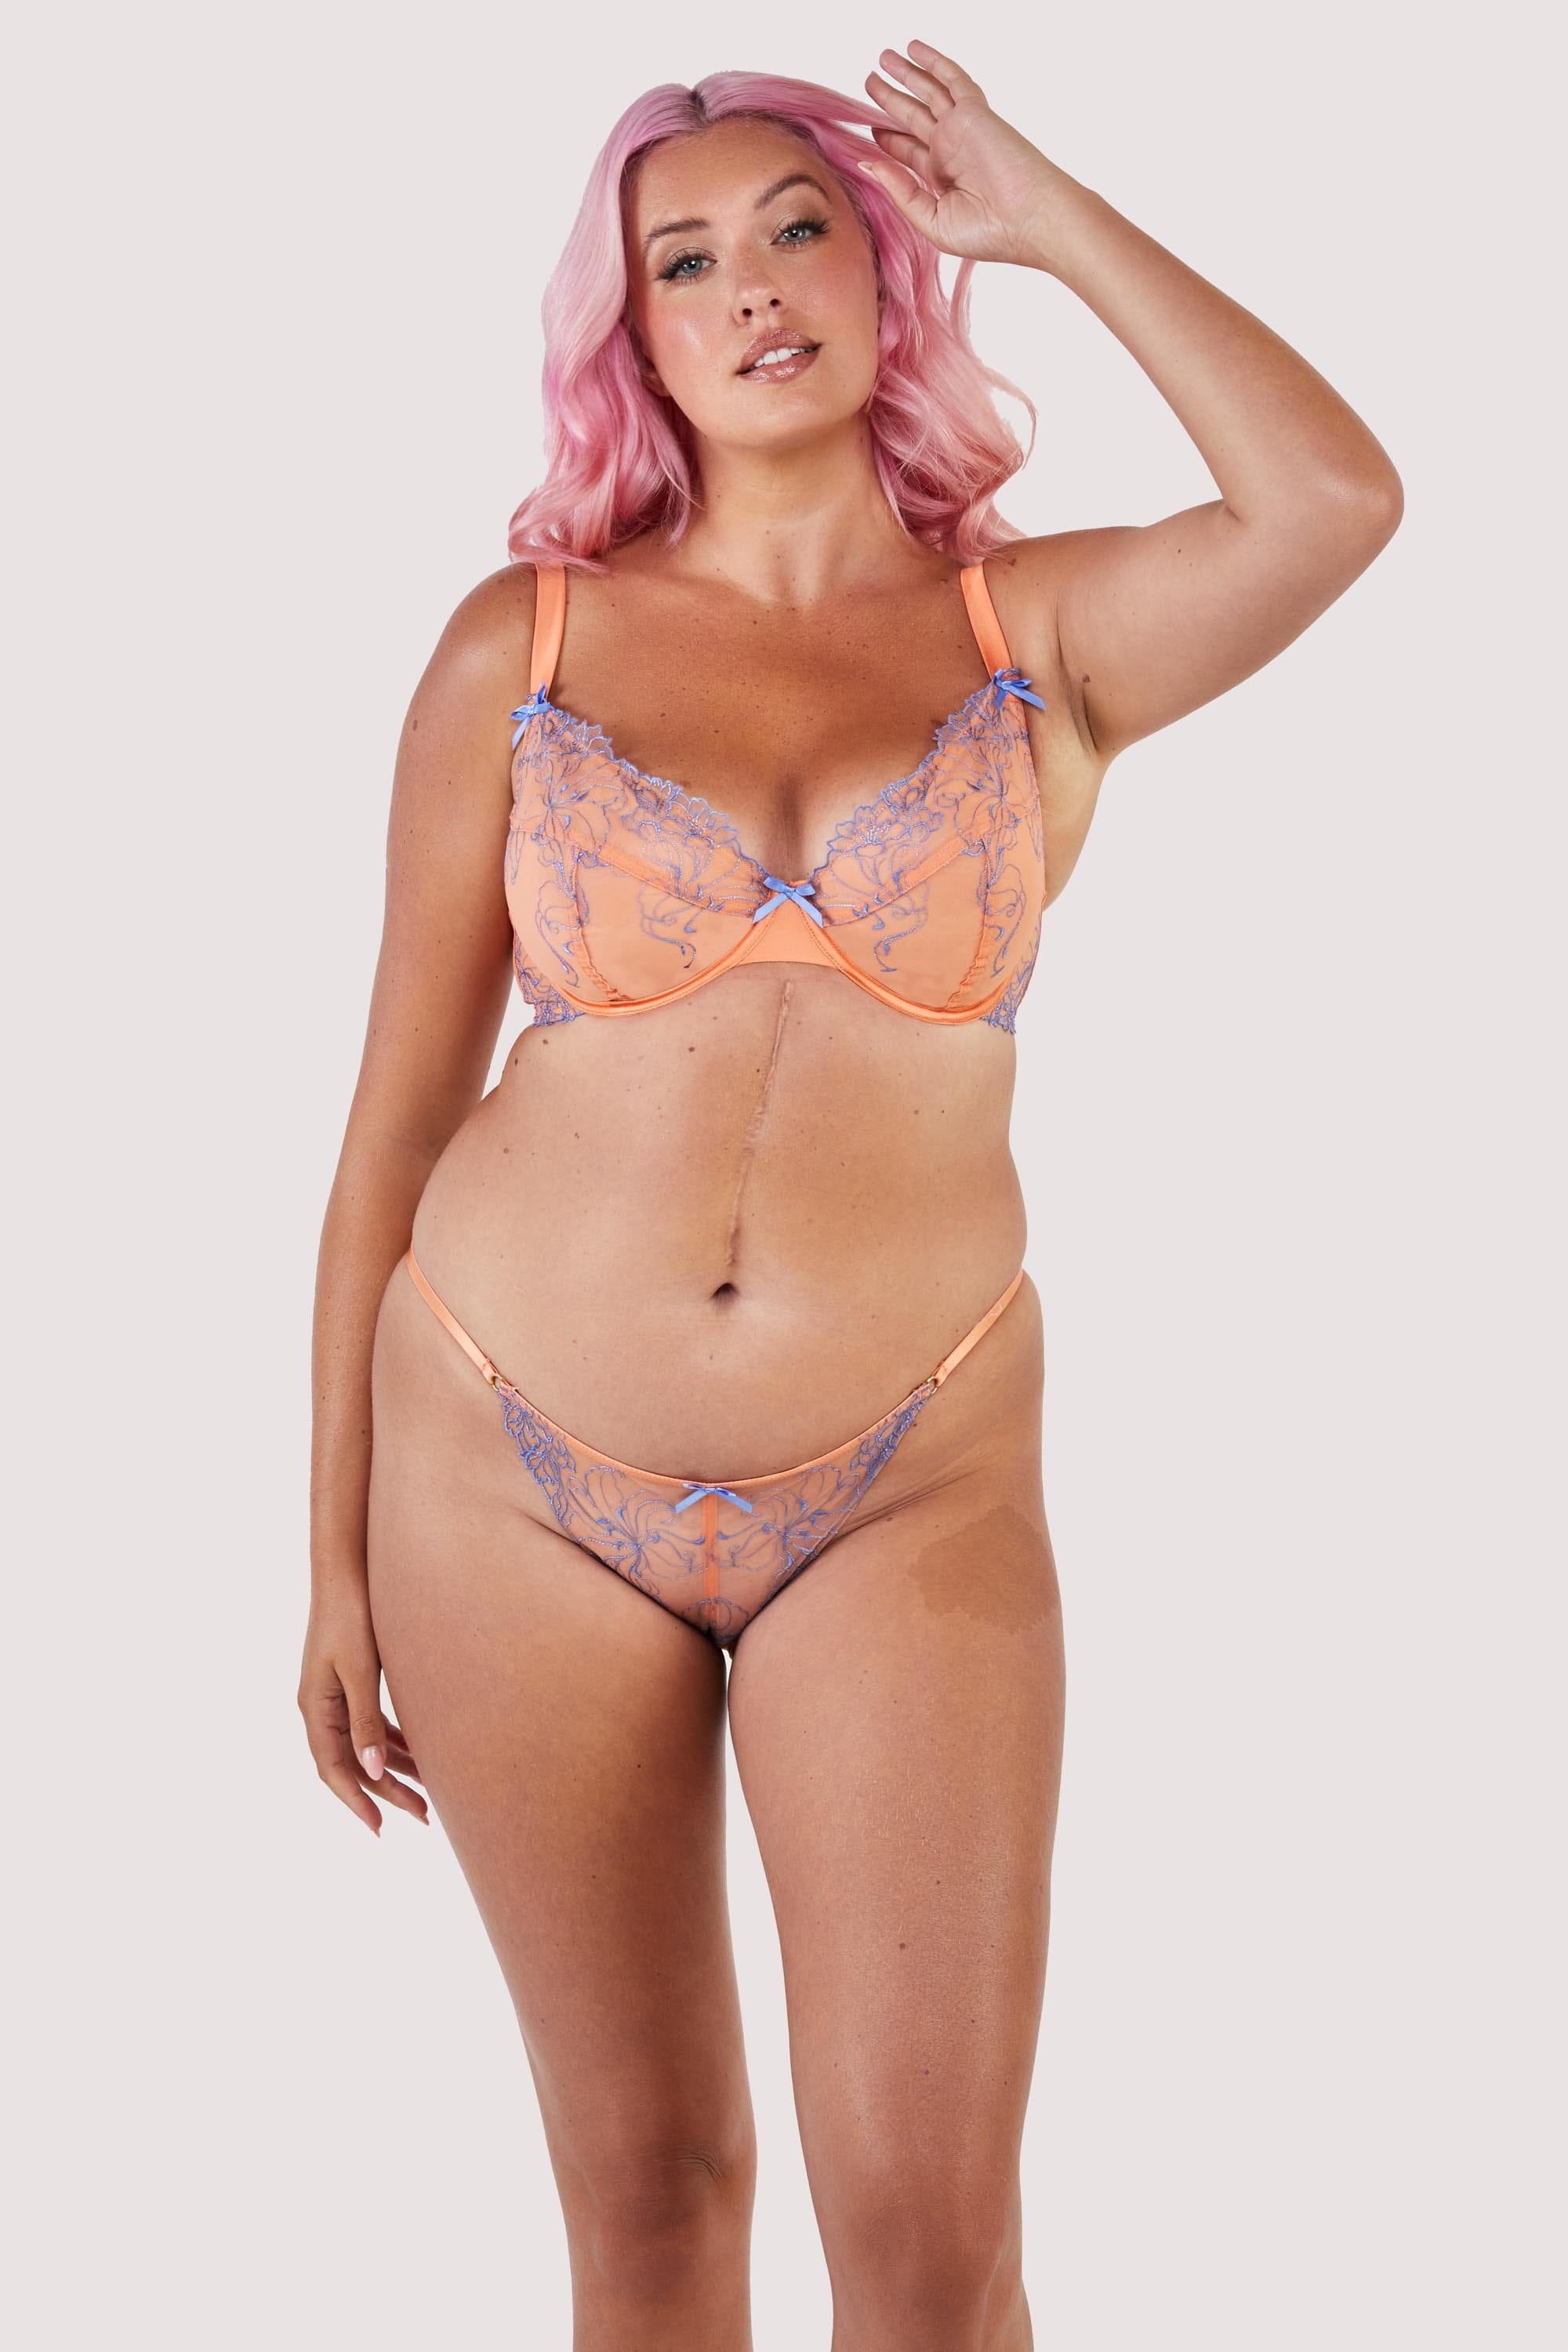 Mesh and lace orange bra and brief set with lilac/blue lace embroidery accents and bows.